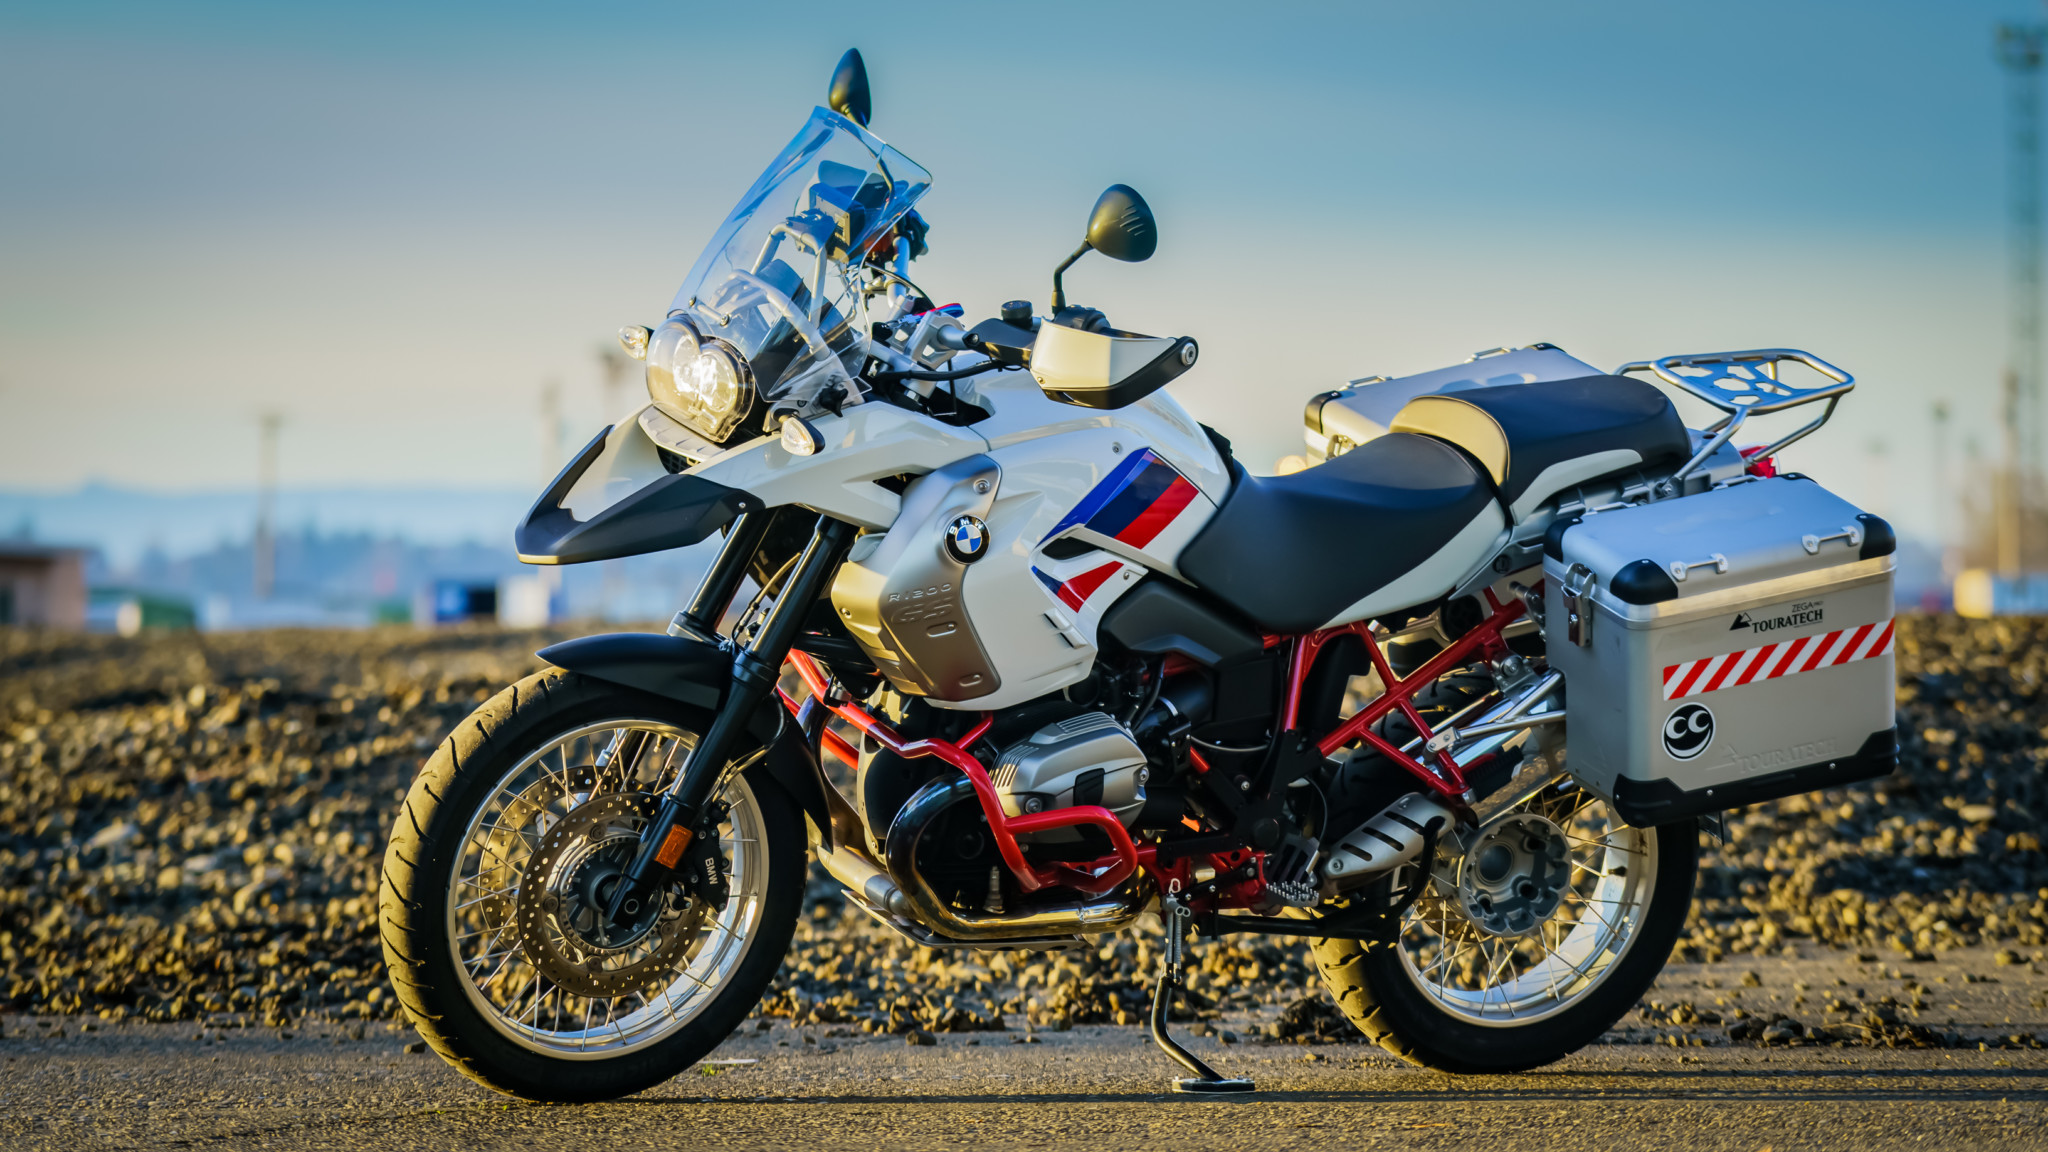 BMW GS 1200 HD Wallpapers free download This BMW Bikes R 1200GS are  adventure bikes which are manufactured in Berlin Germany by B  2017 bmw  Bmw motorbikes Bmw